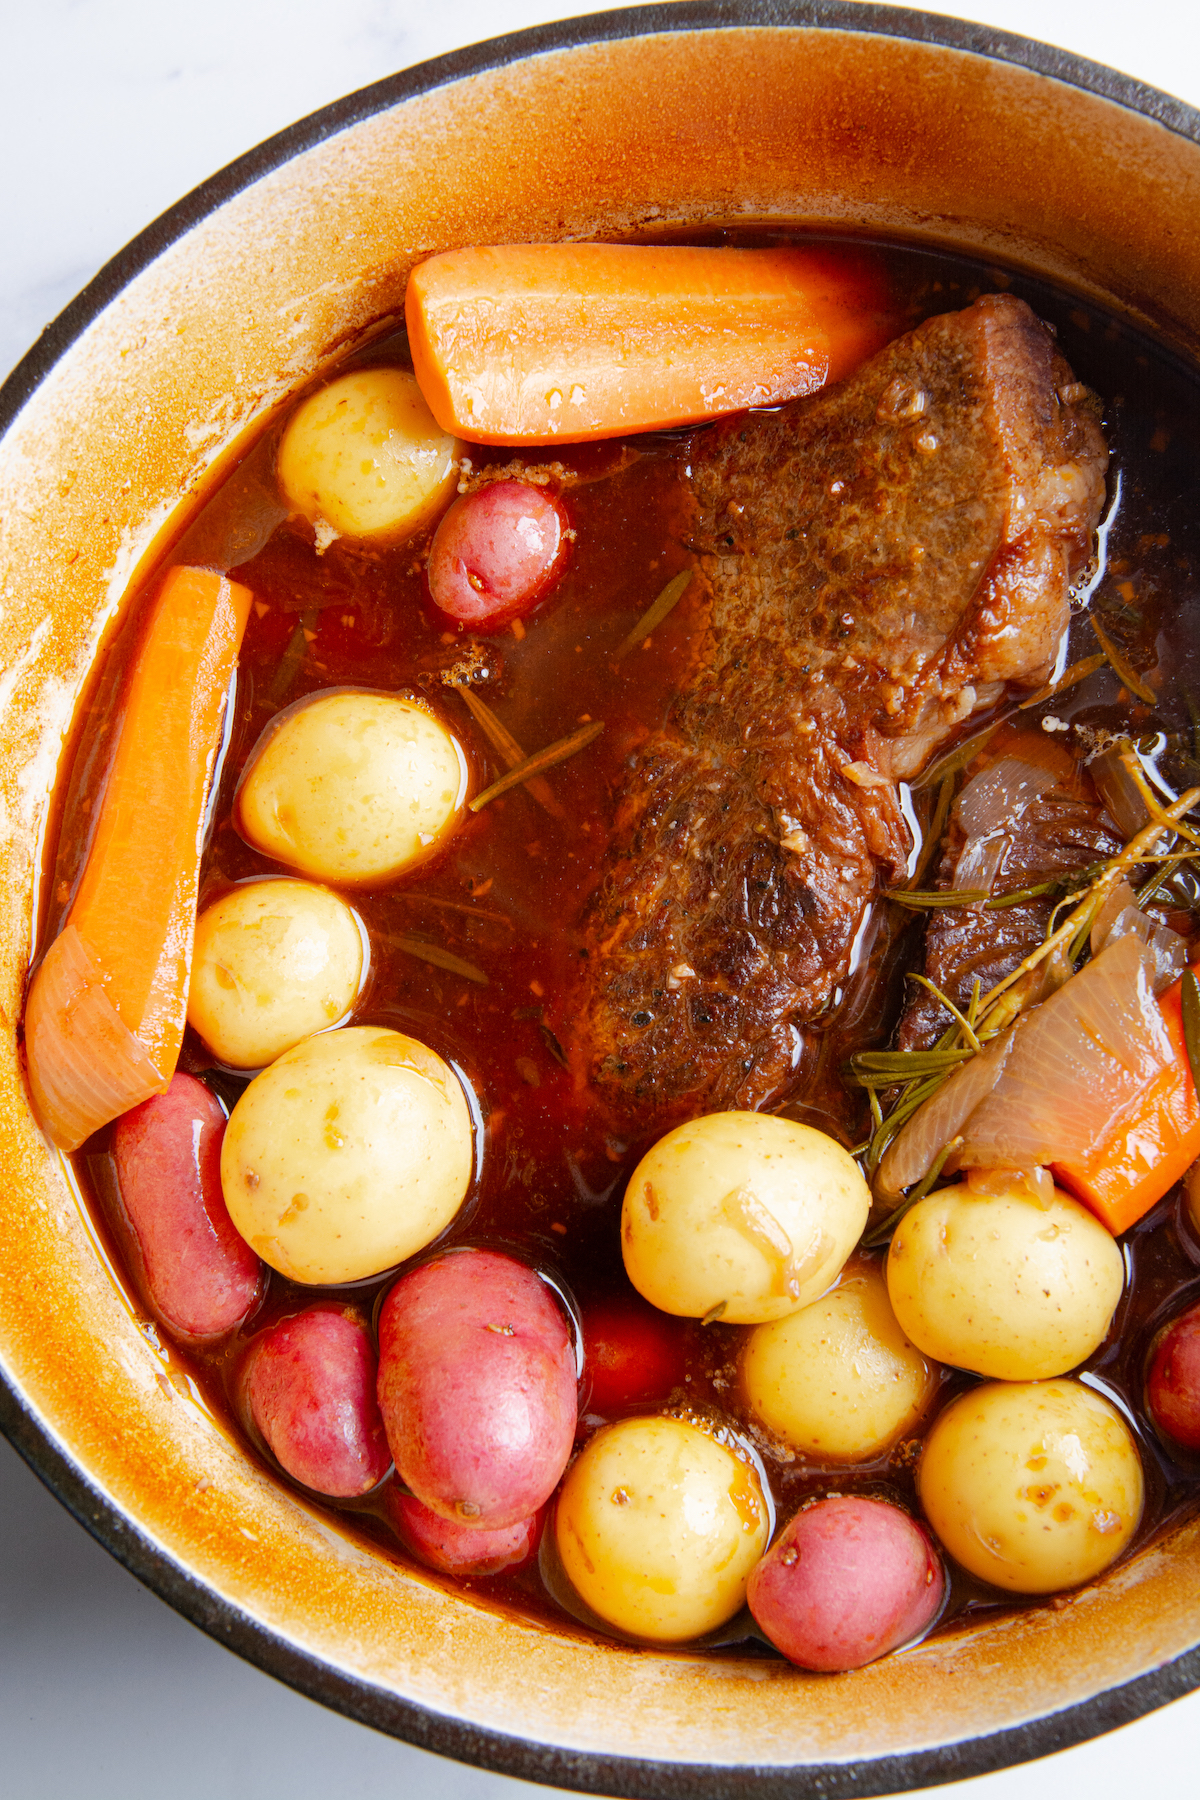 A large Dutch oven with a partially cooked rump roast in beef stock and red wine, with added baby potatoes and carrots.